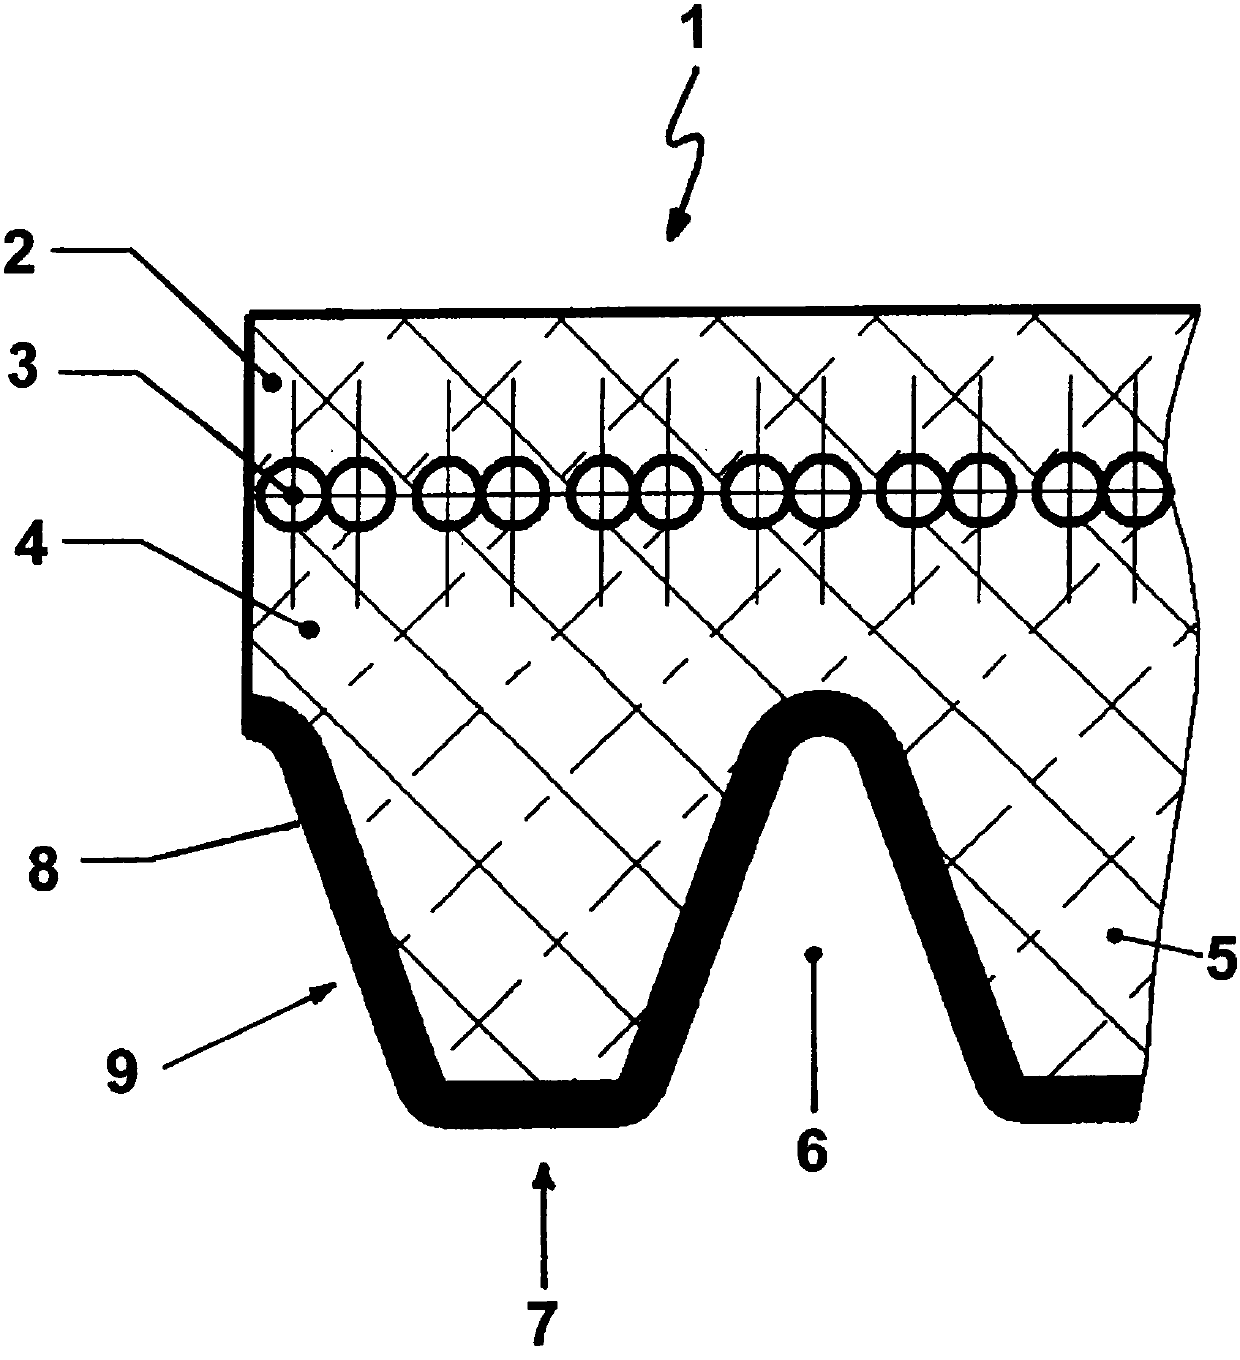 Elastic articles with coverings, especially drive belts